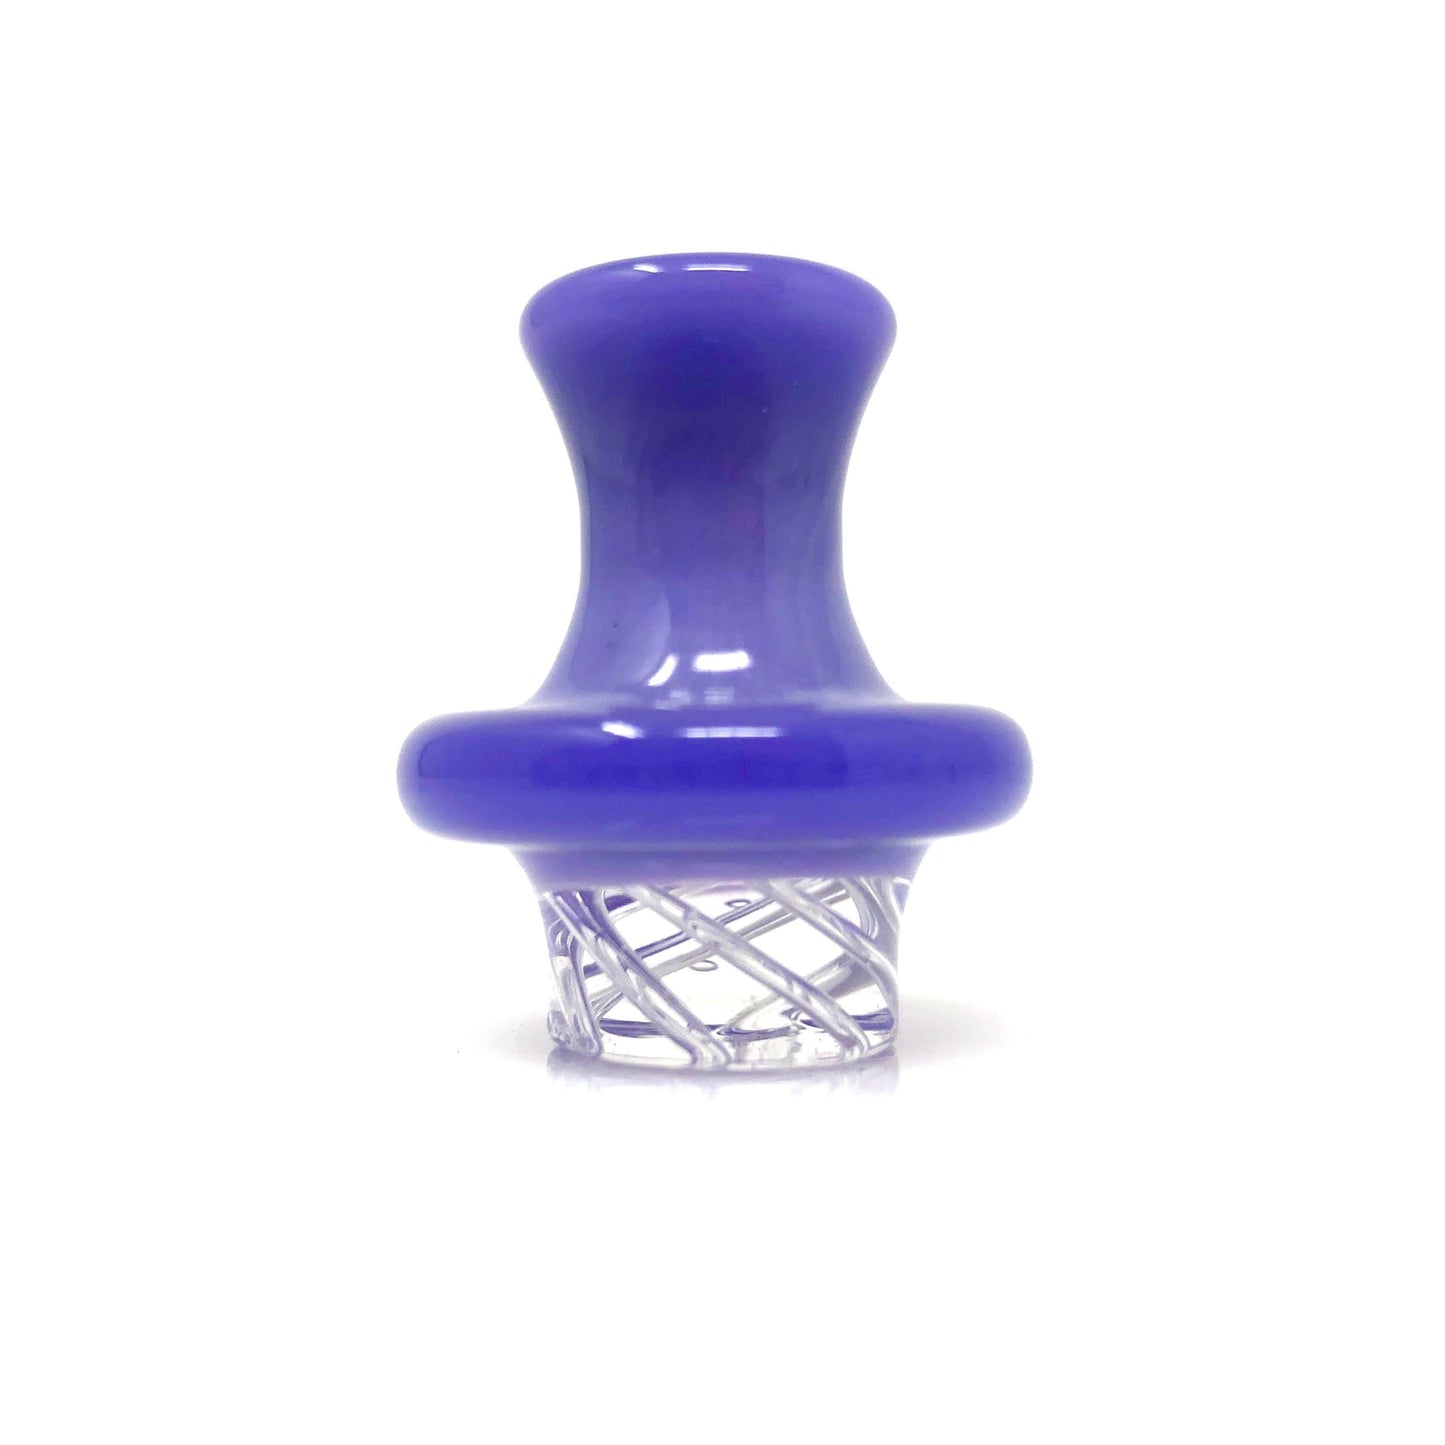 AFM Smoke Carb Cap Purple Color Turbo Spinner Glass Carb Cap + 2 Pearls